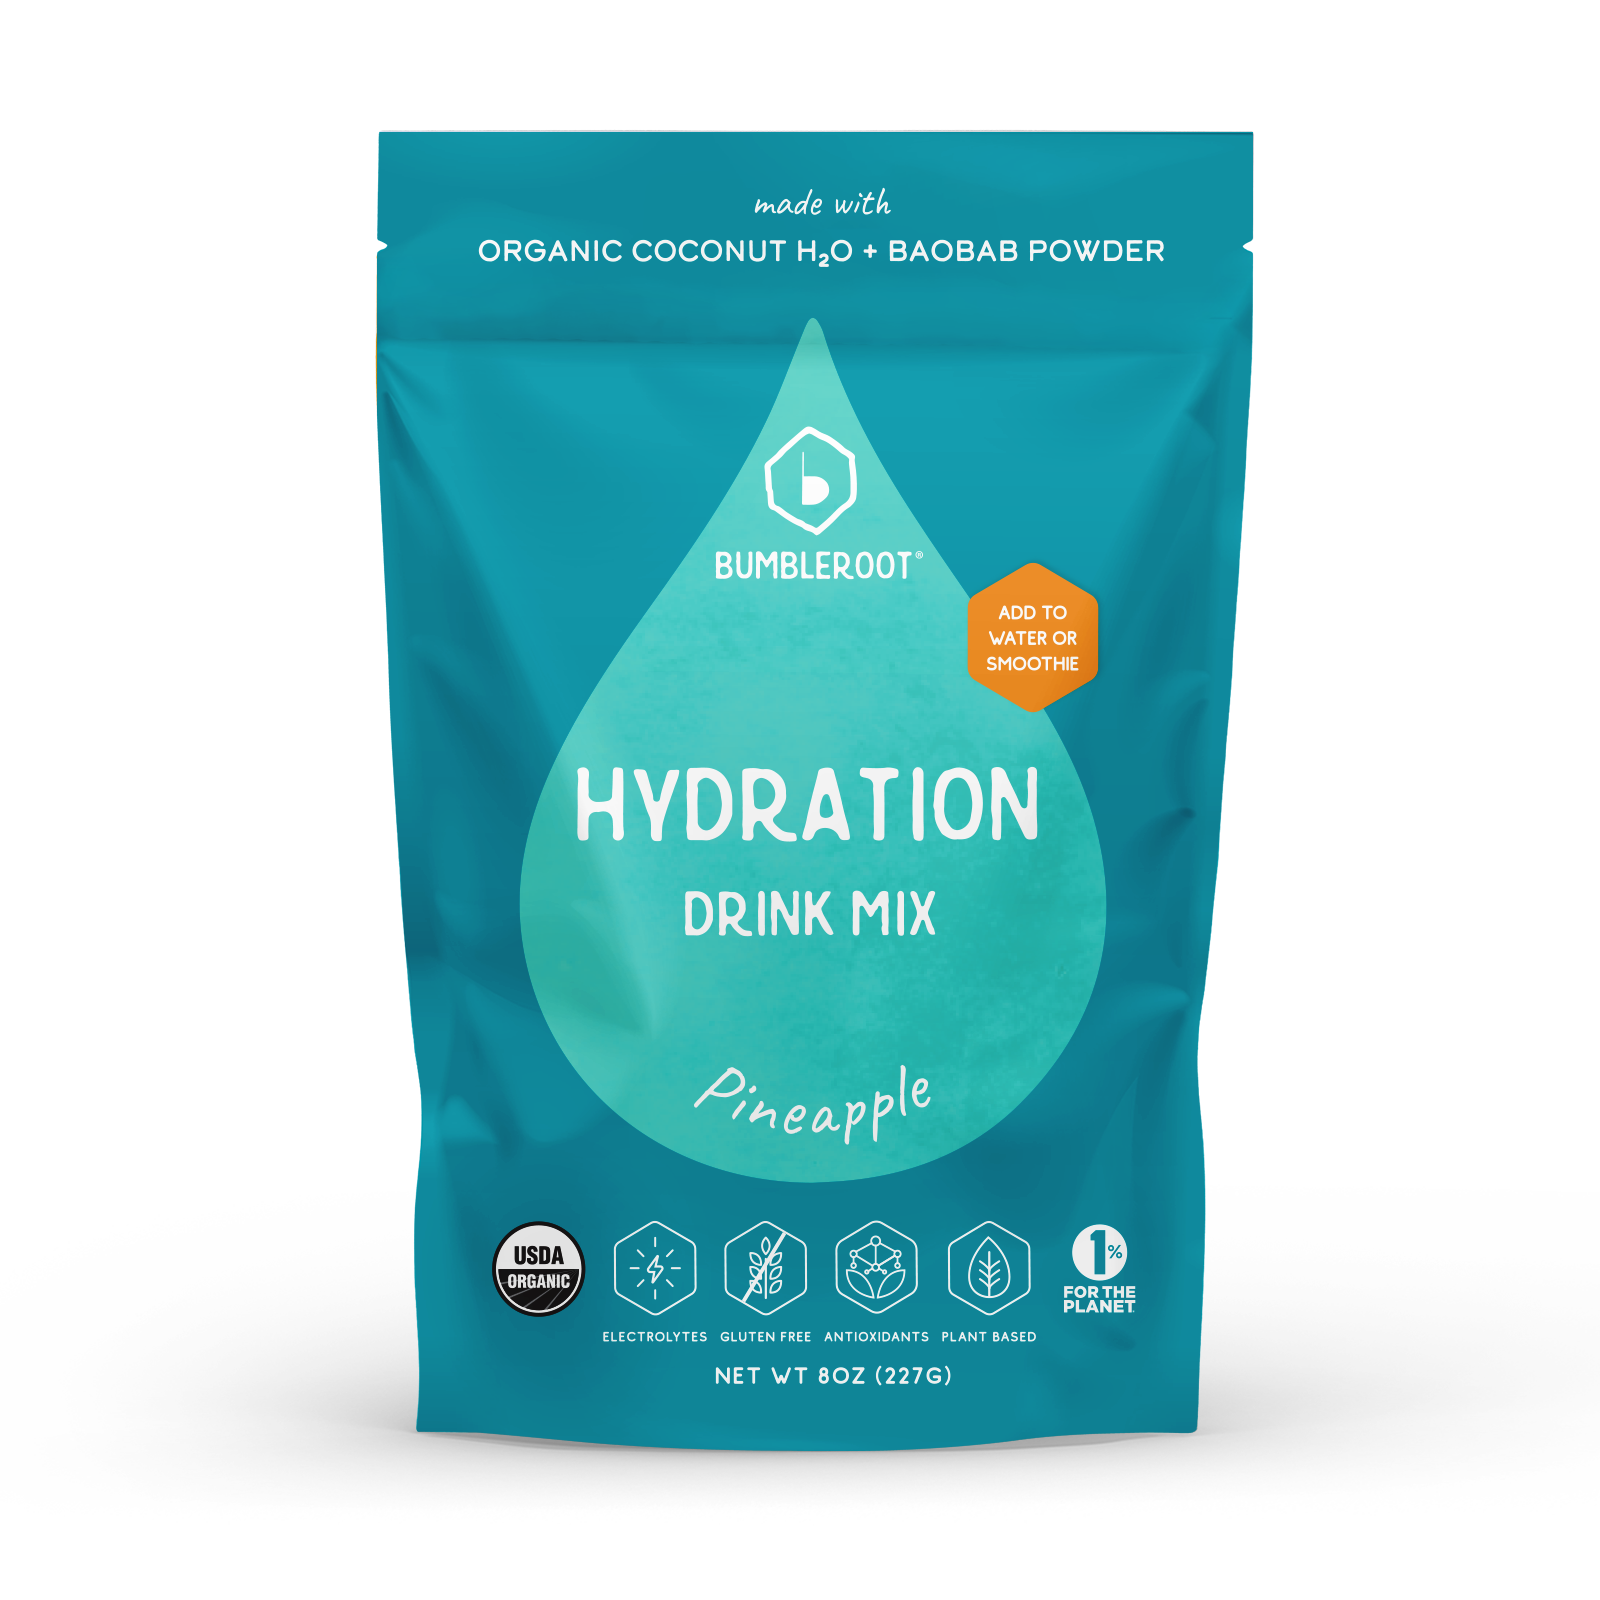 Organic Hydration Drink Mix (Pineapple), 8 oz pouch/19 servings